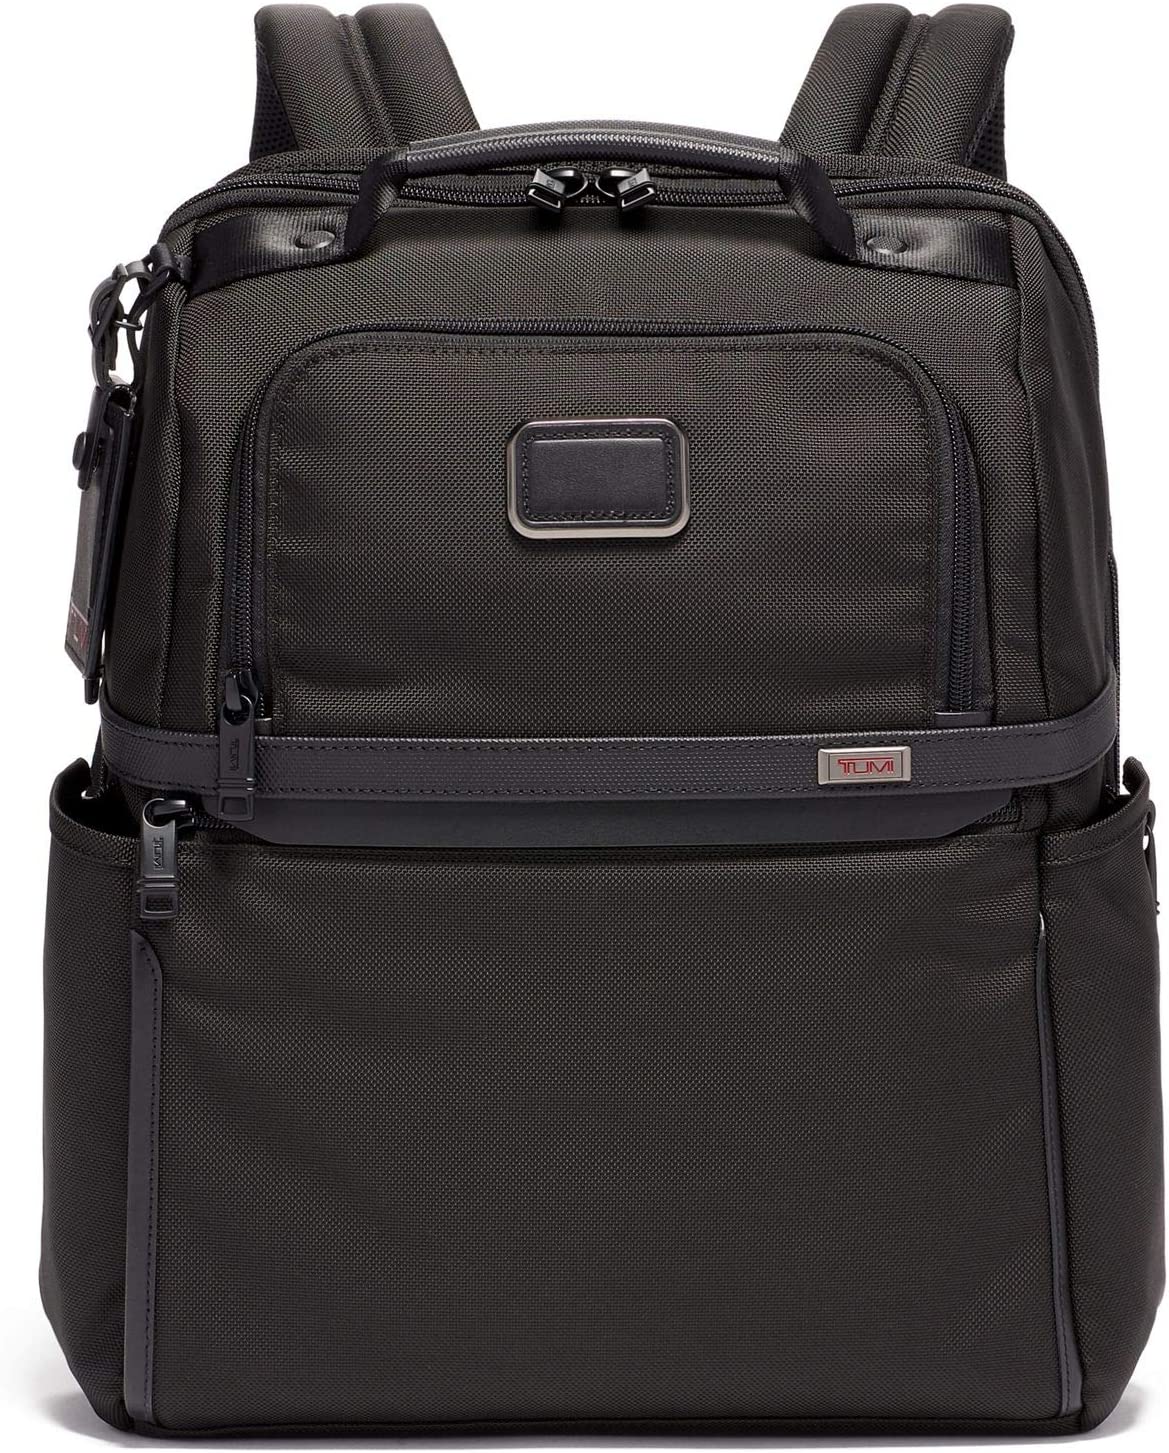 TUMI Alpha 3 Slim Solutions Laptop Brief Backpack - Hands-Free Comfort for Commuters - 15-Inch Computer Backpack for Men and Women - Black